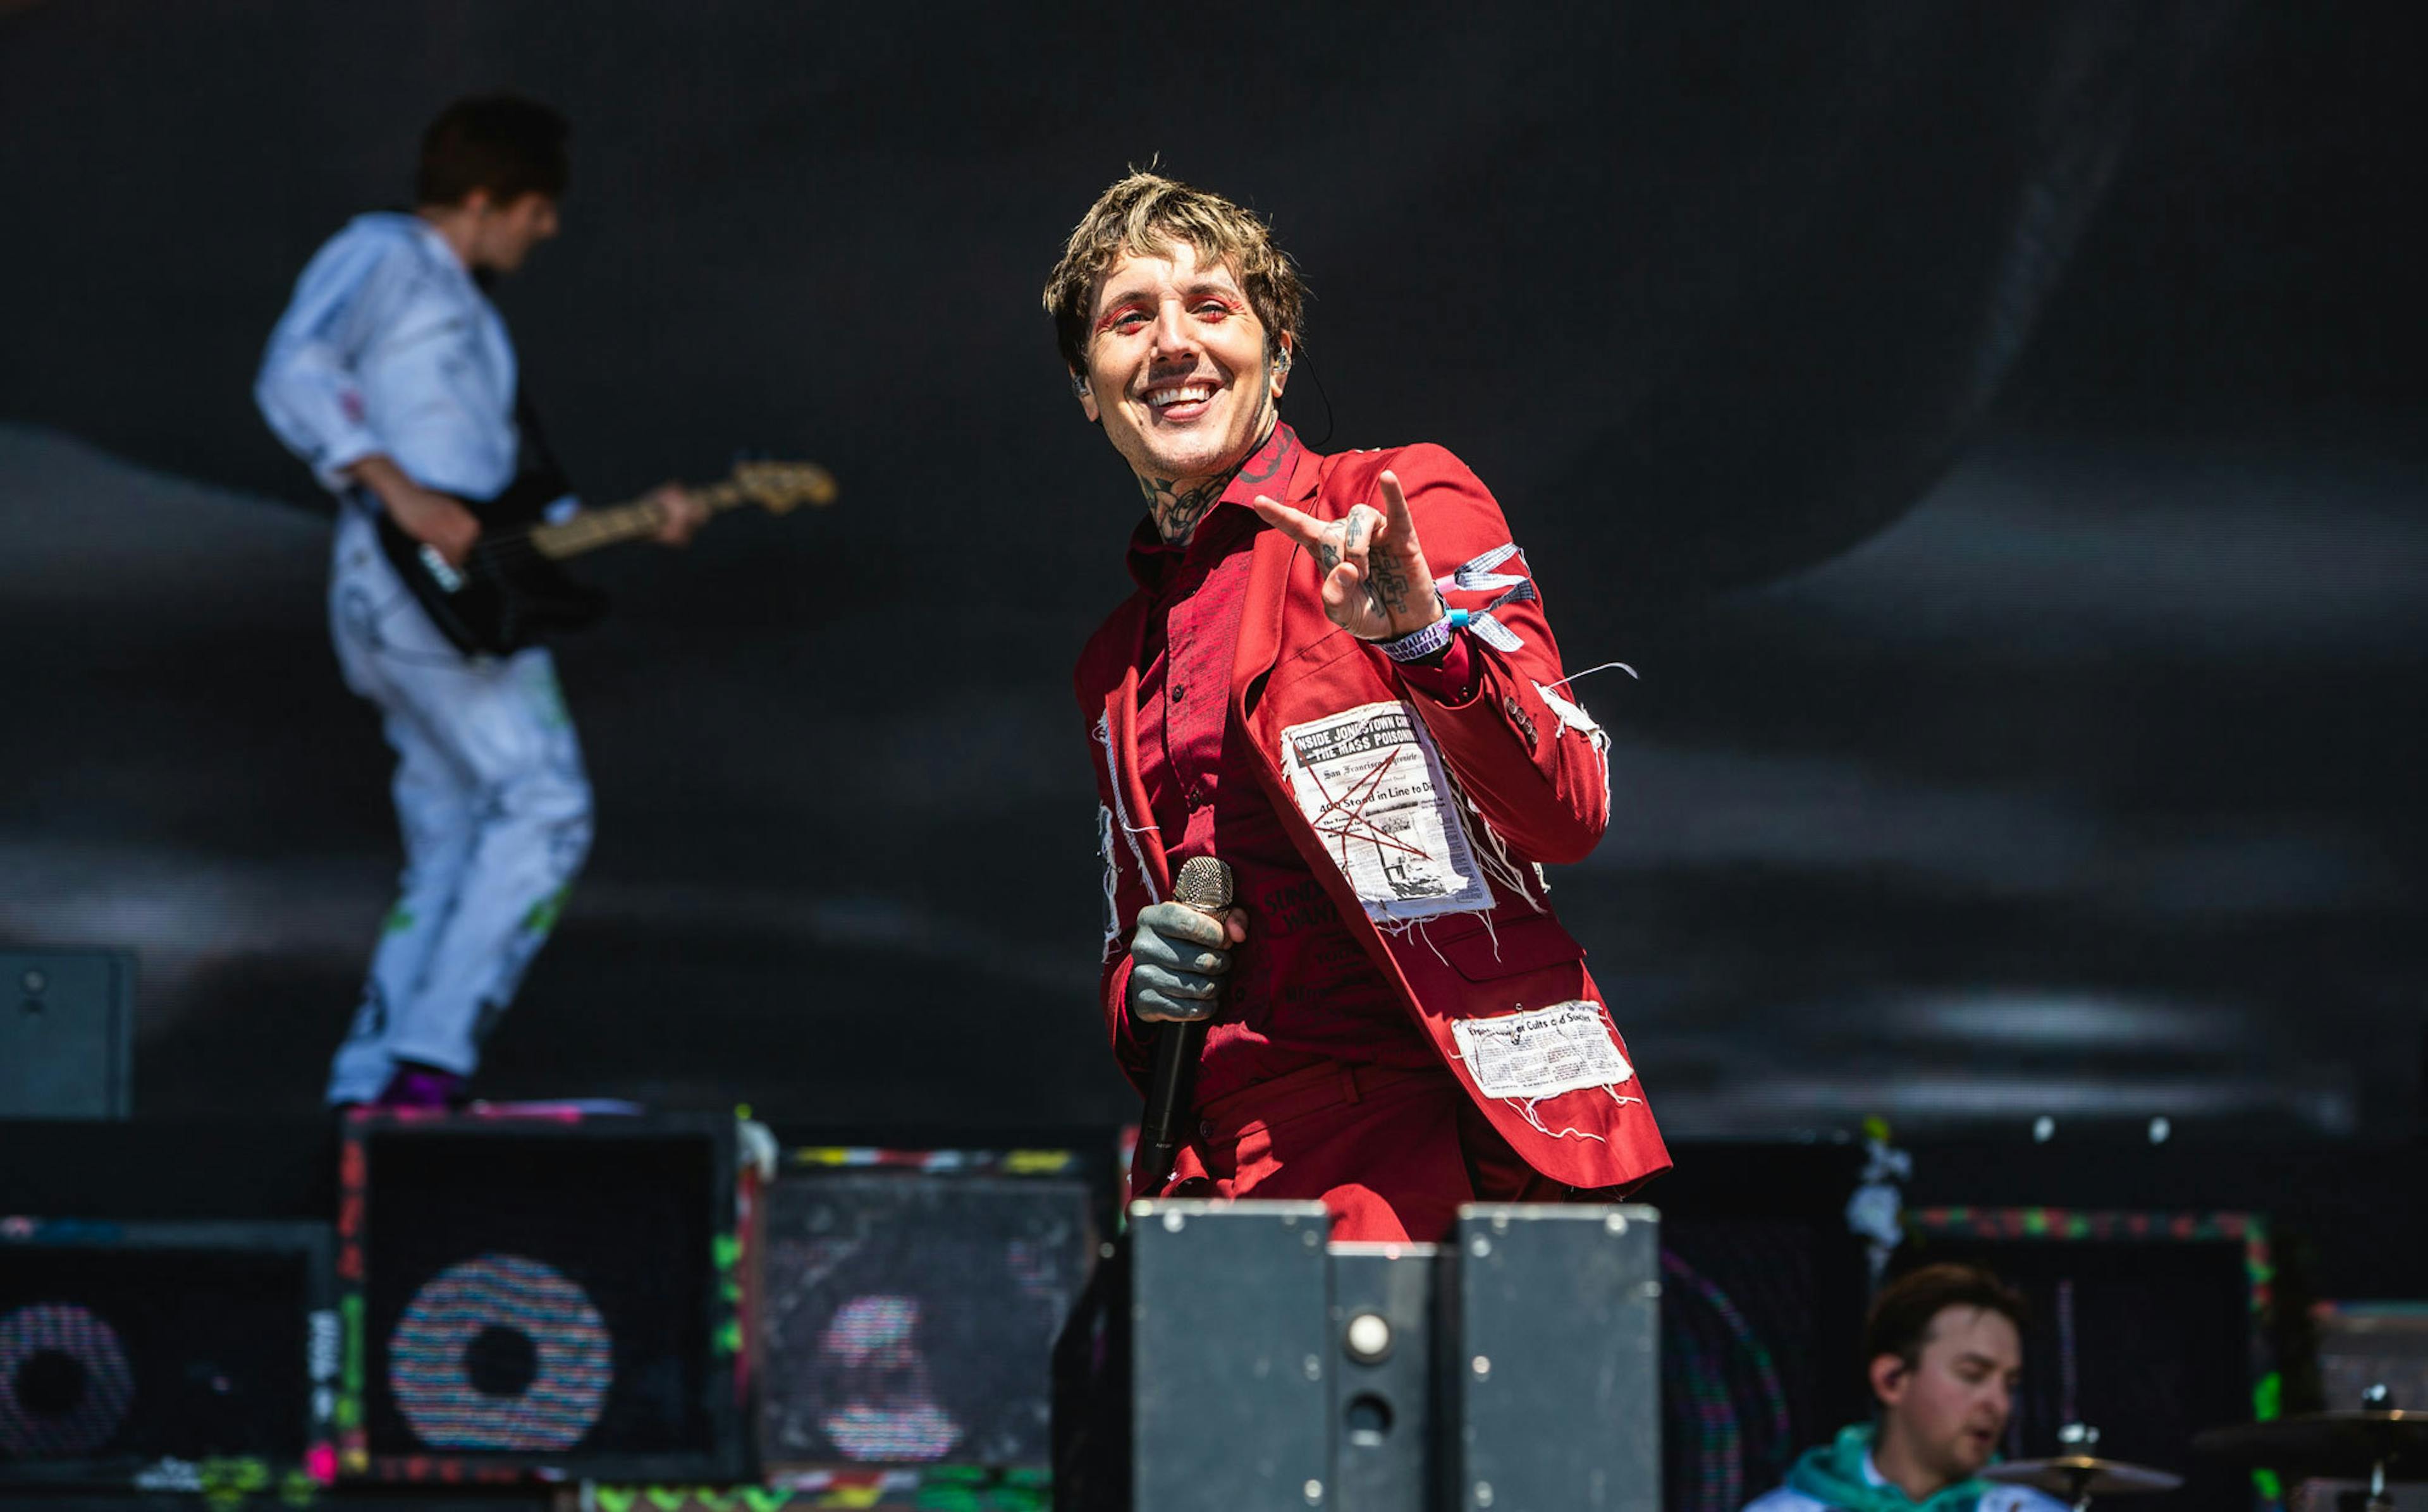 Bring Me The Horizon announce UK tour support, add more tickets